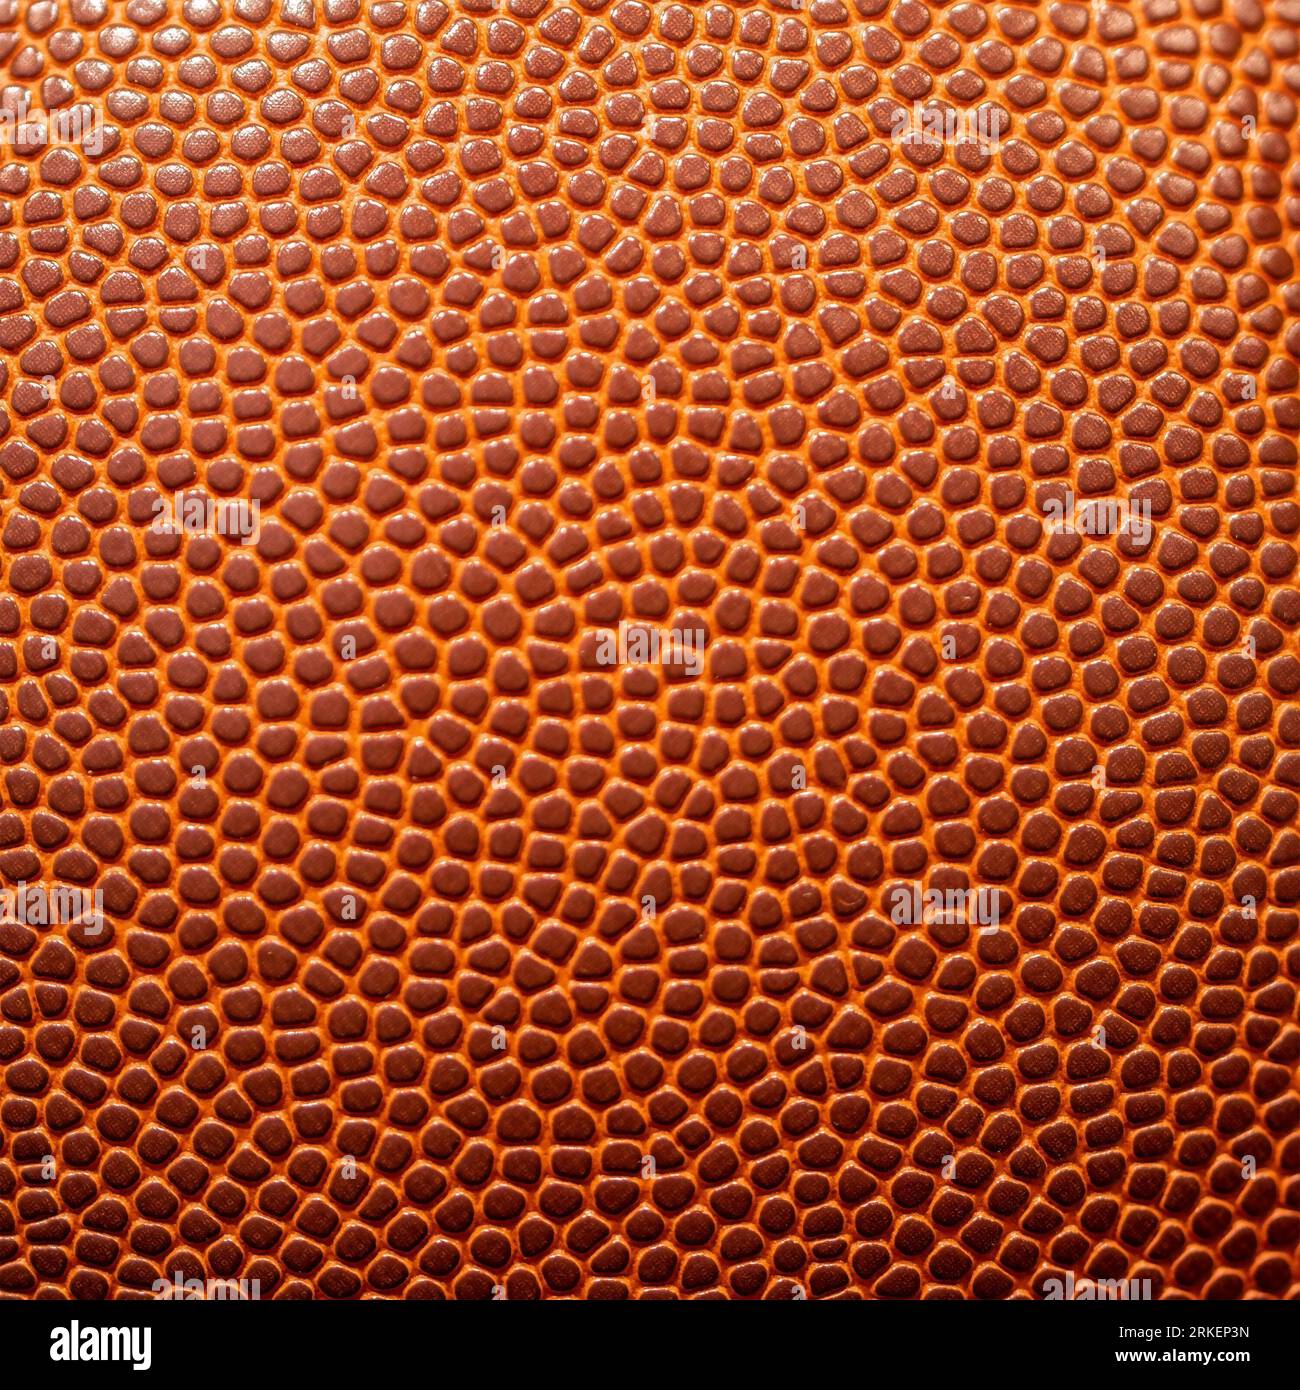 Basketball close-up background. Studio shot, empty space for text Stock Photo